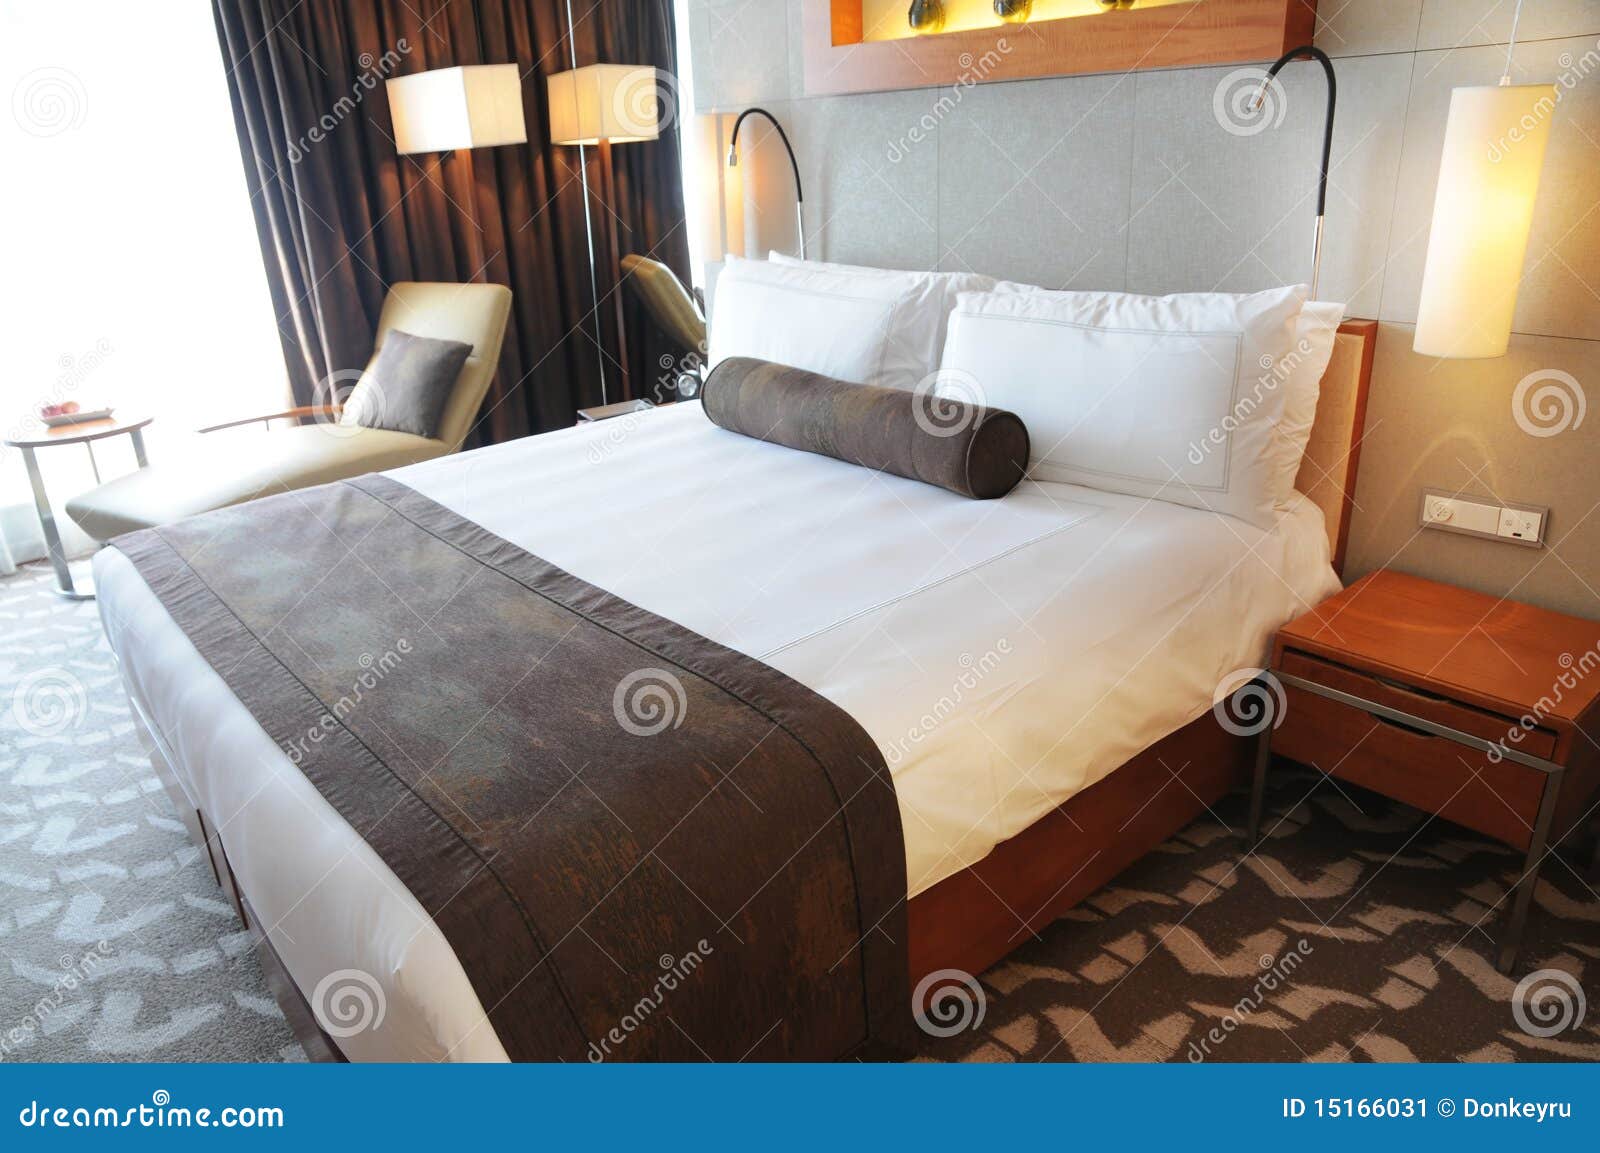 luxury hotel room with king size bed